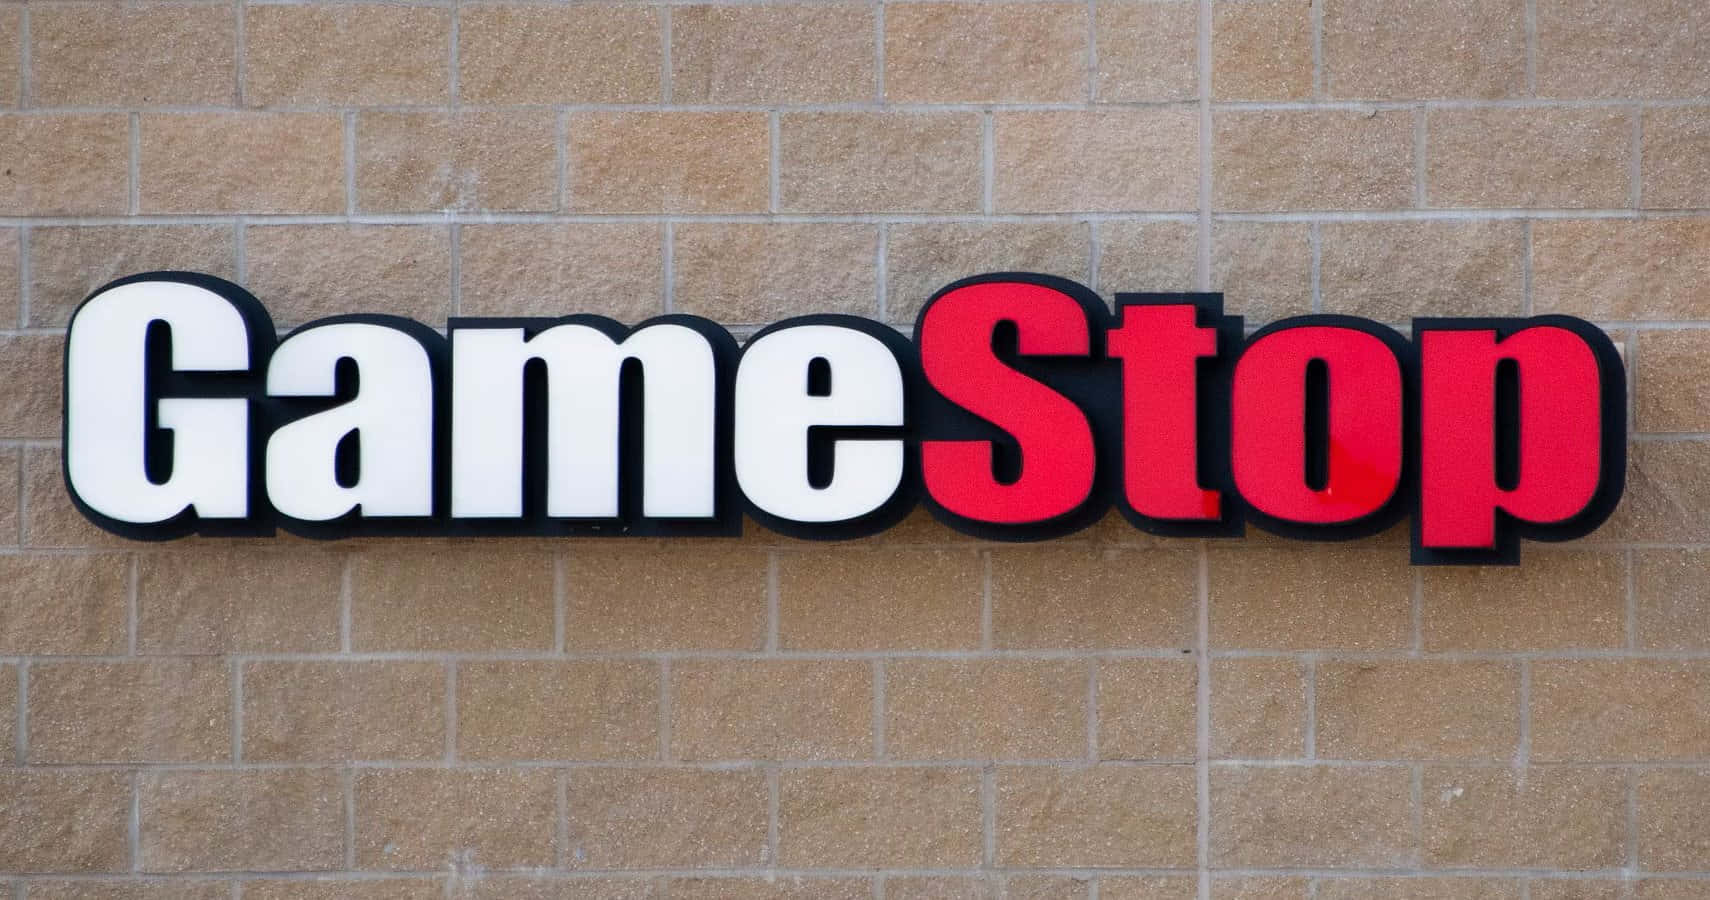 A Sign For Gamestop Is Seen On A Building